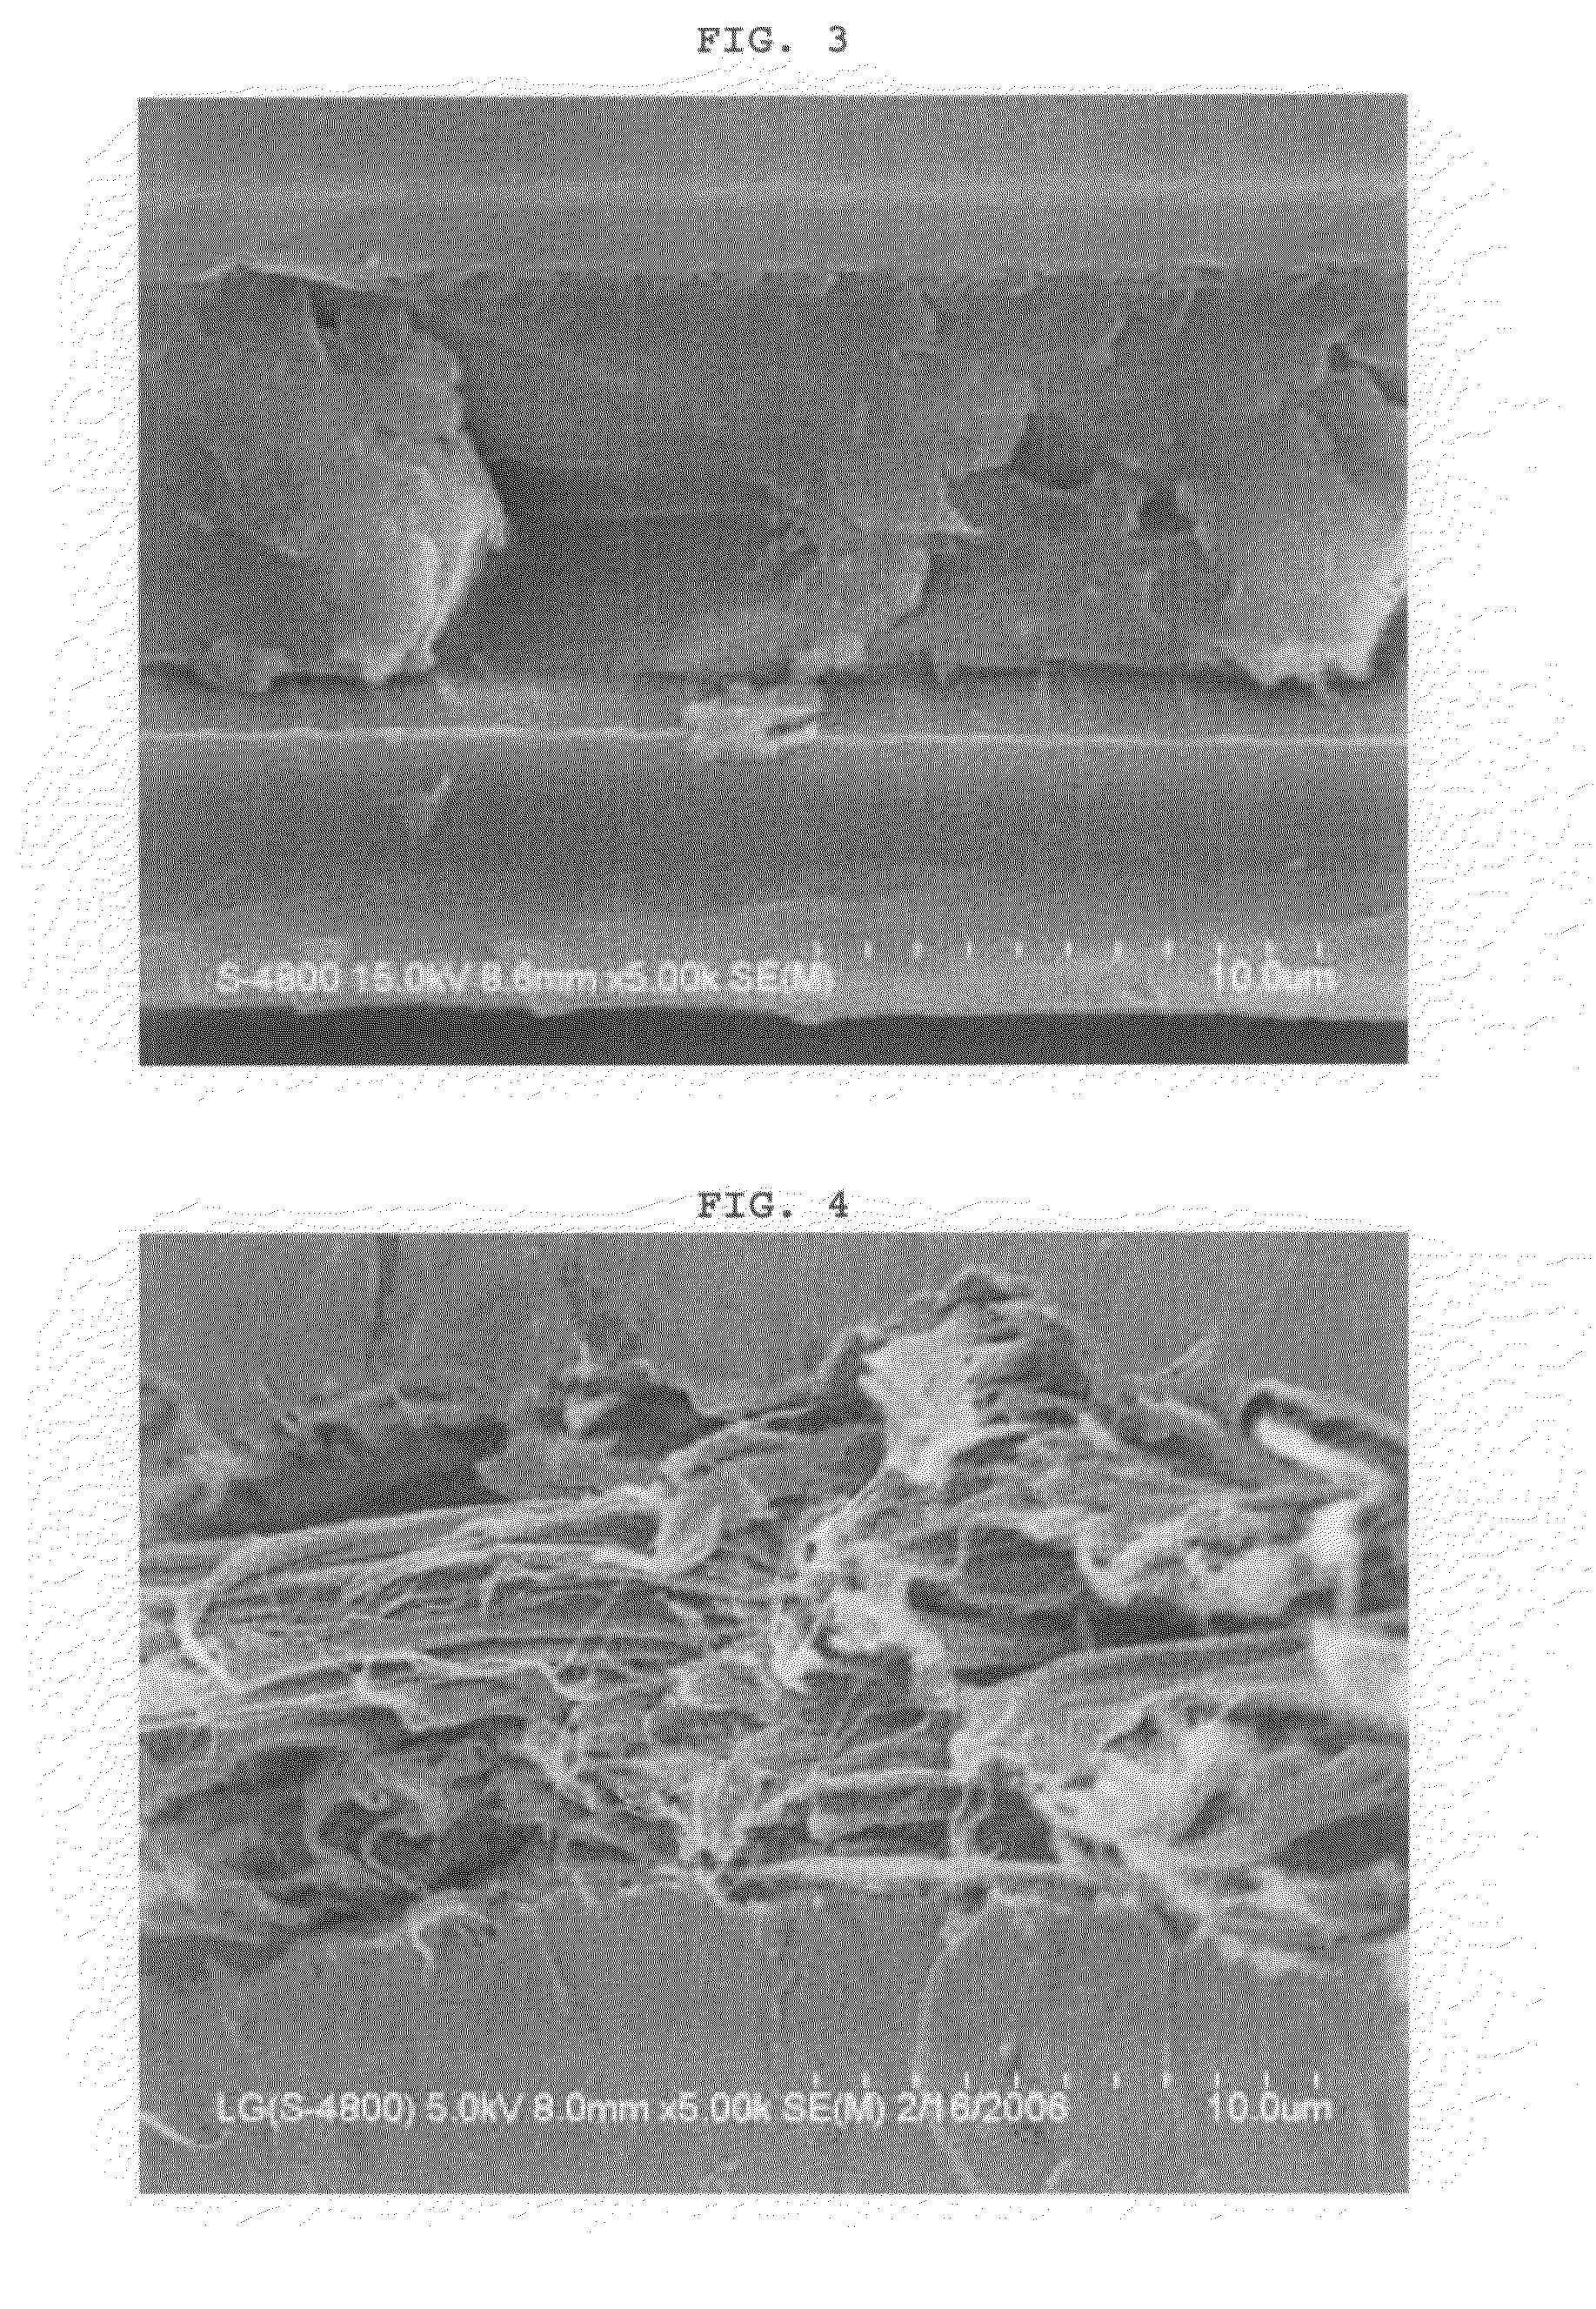 Reinforced composite electrolyte membrane for fuel cell